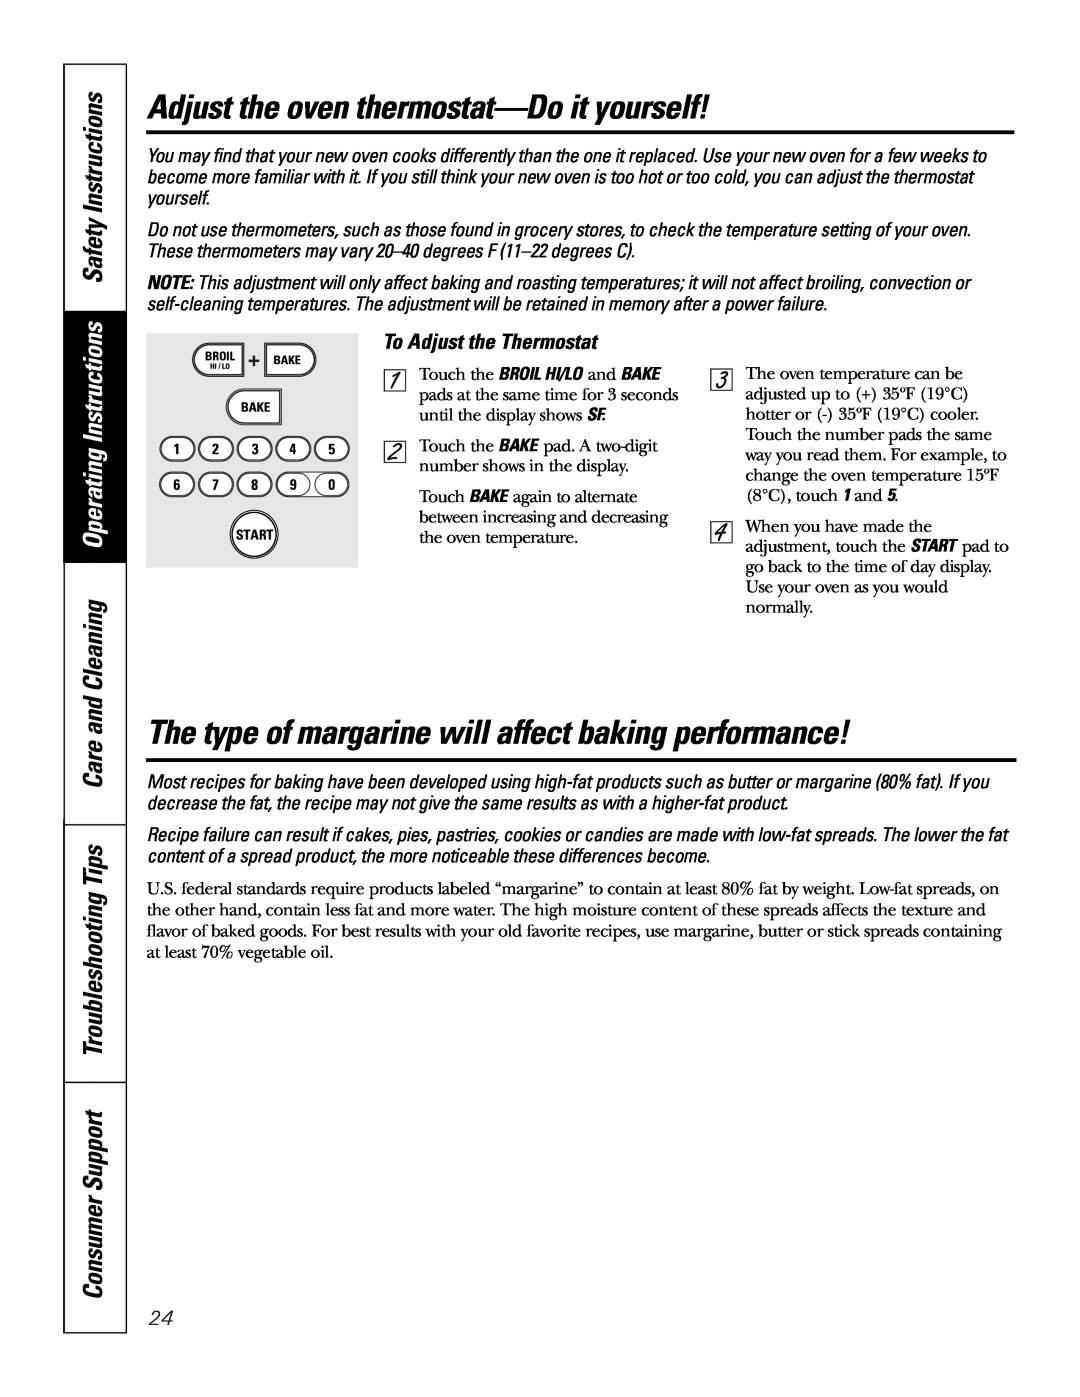 GE PGS968 Adjust the oven thermostat—Doit yourself, and Cleaning Operating Instructions, To Adjust the Thermostat 